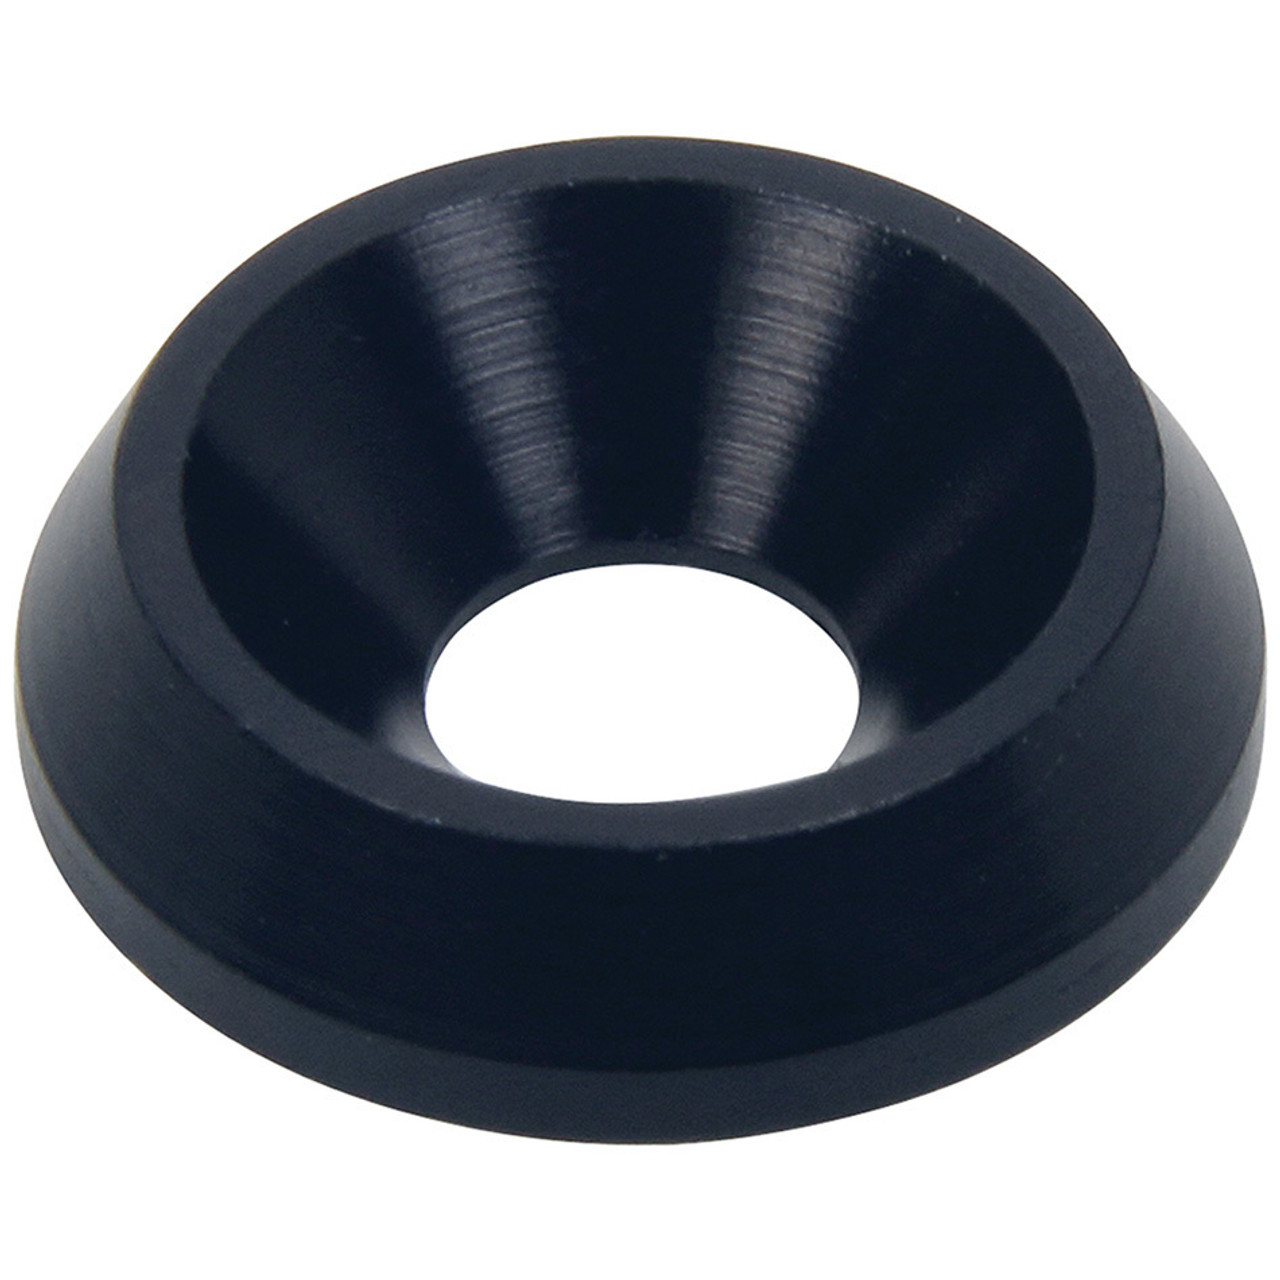 Countersunk Washer Blk 1/4in x 3/4in 50pk